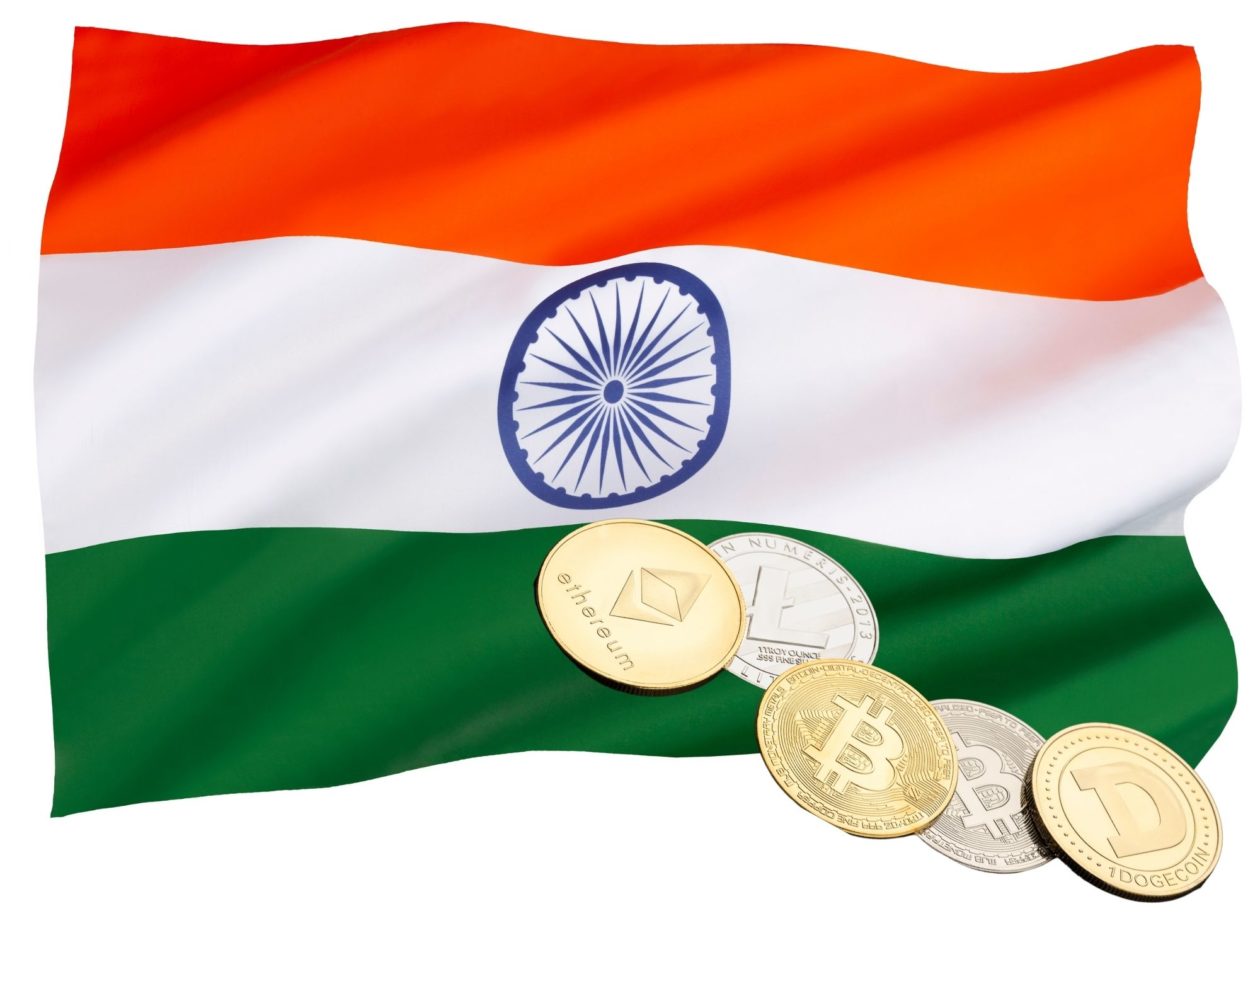 India's crypto bill will impose strict rules including jail-time for violations